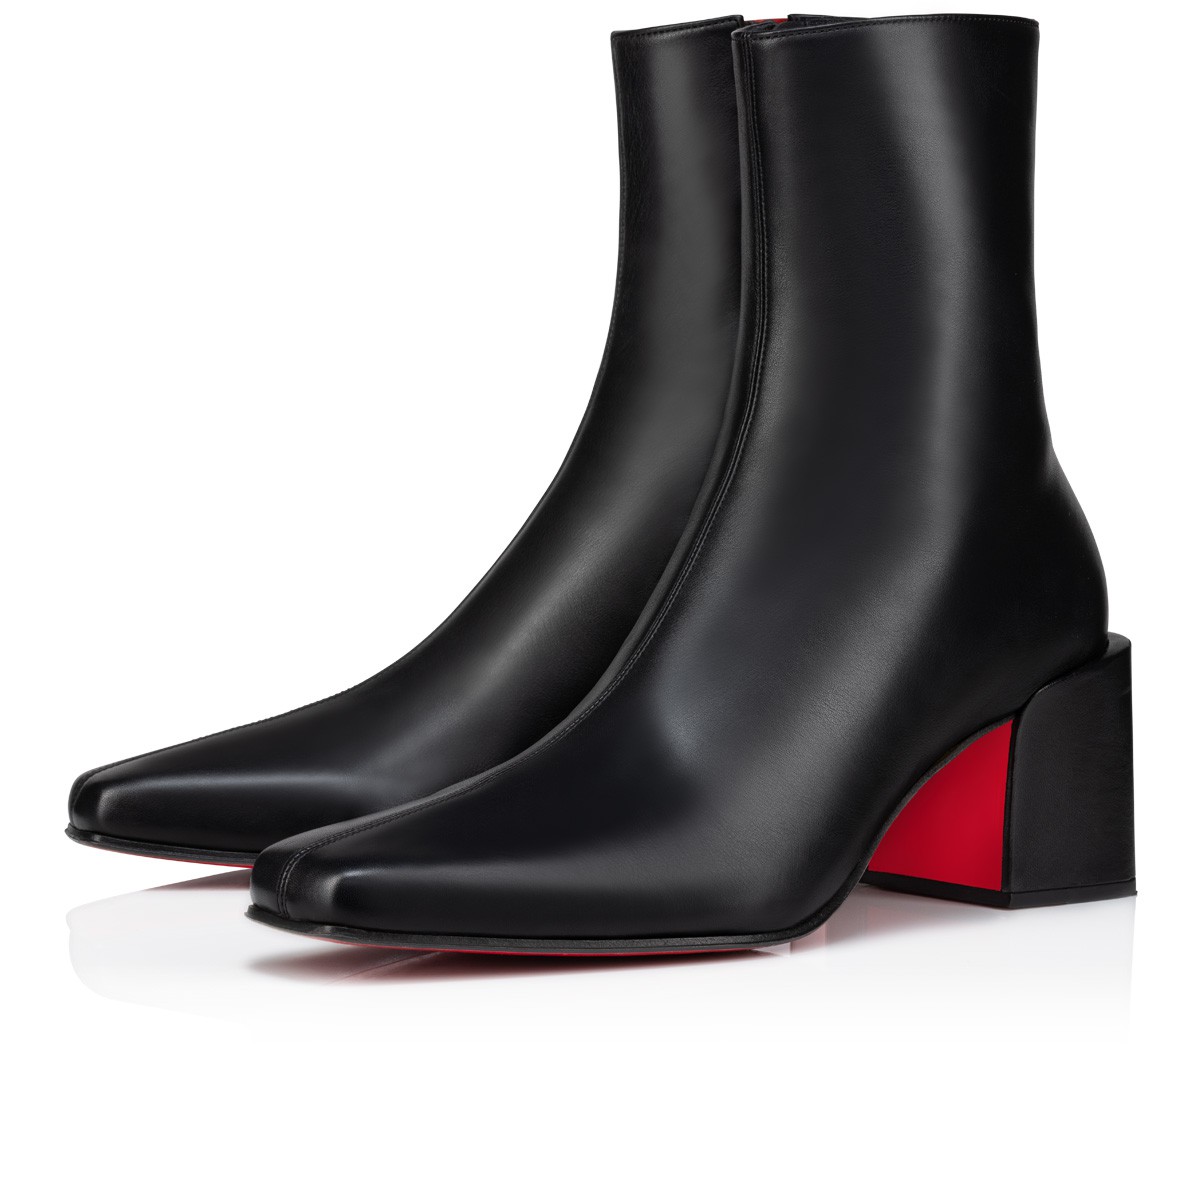 Alleo Boot 70 Black Calf leather - Men Shoes - Christian Louboutin